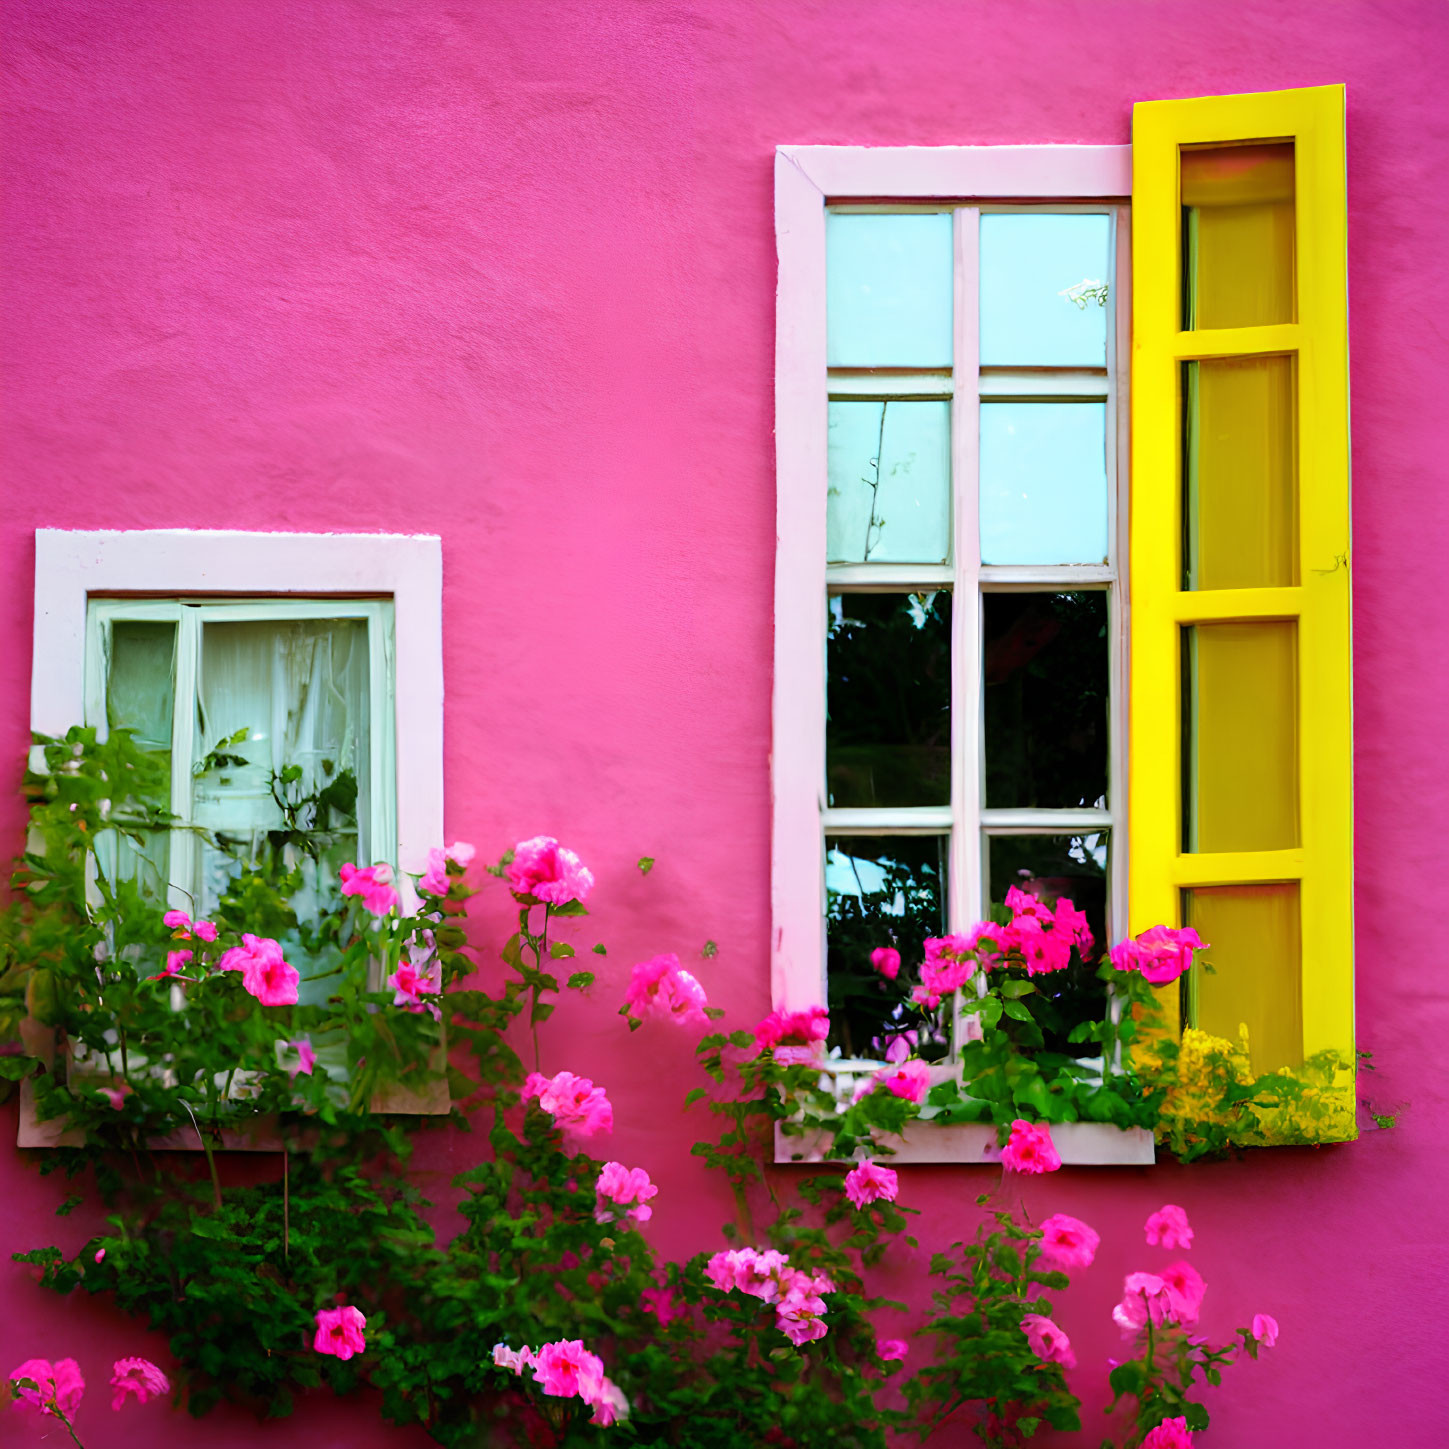 Vibrant Pink Wall with White and Yellow Window Frames and Pink Flowers